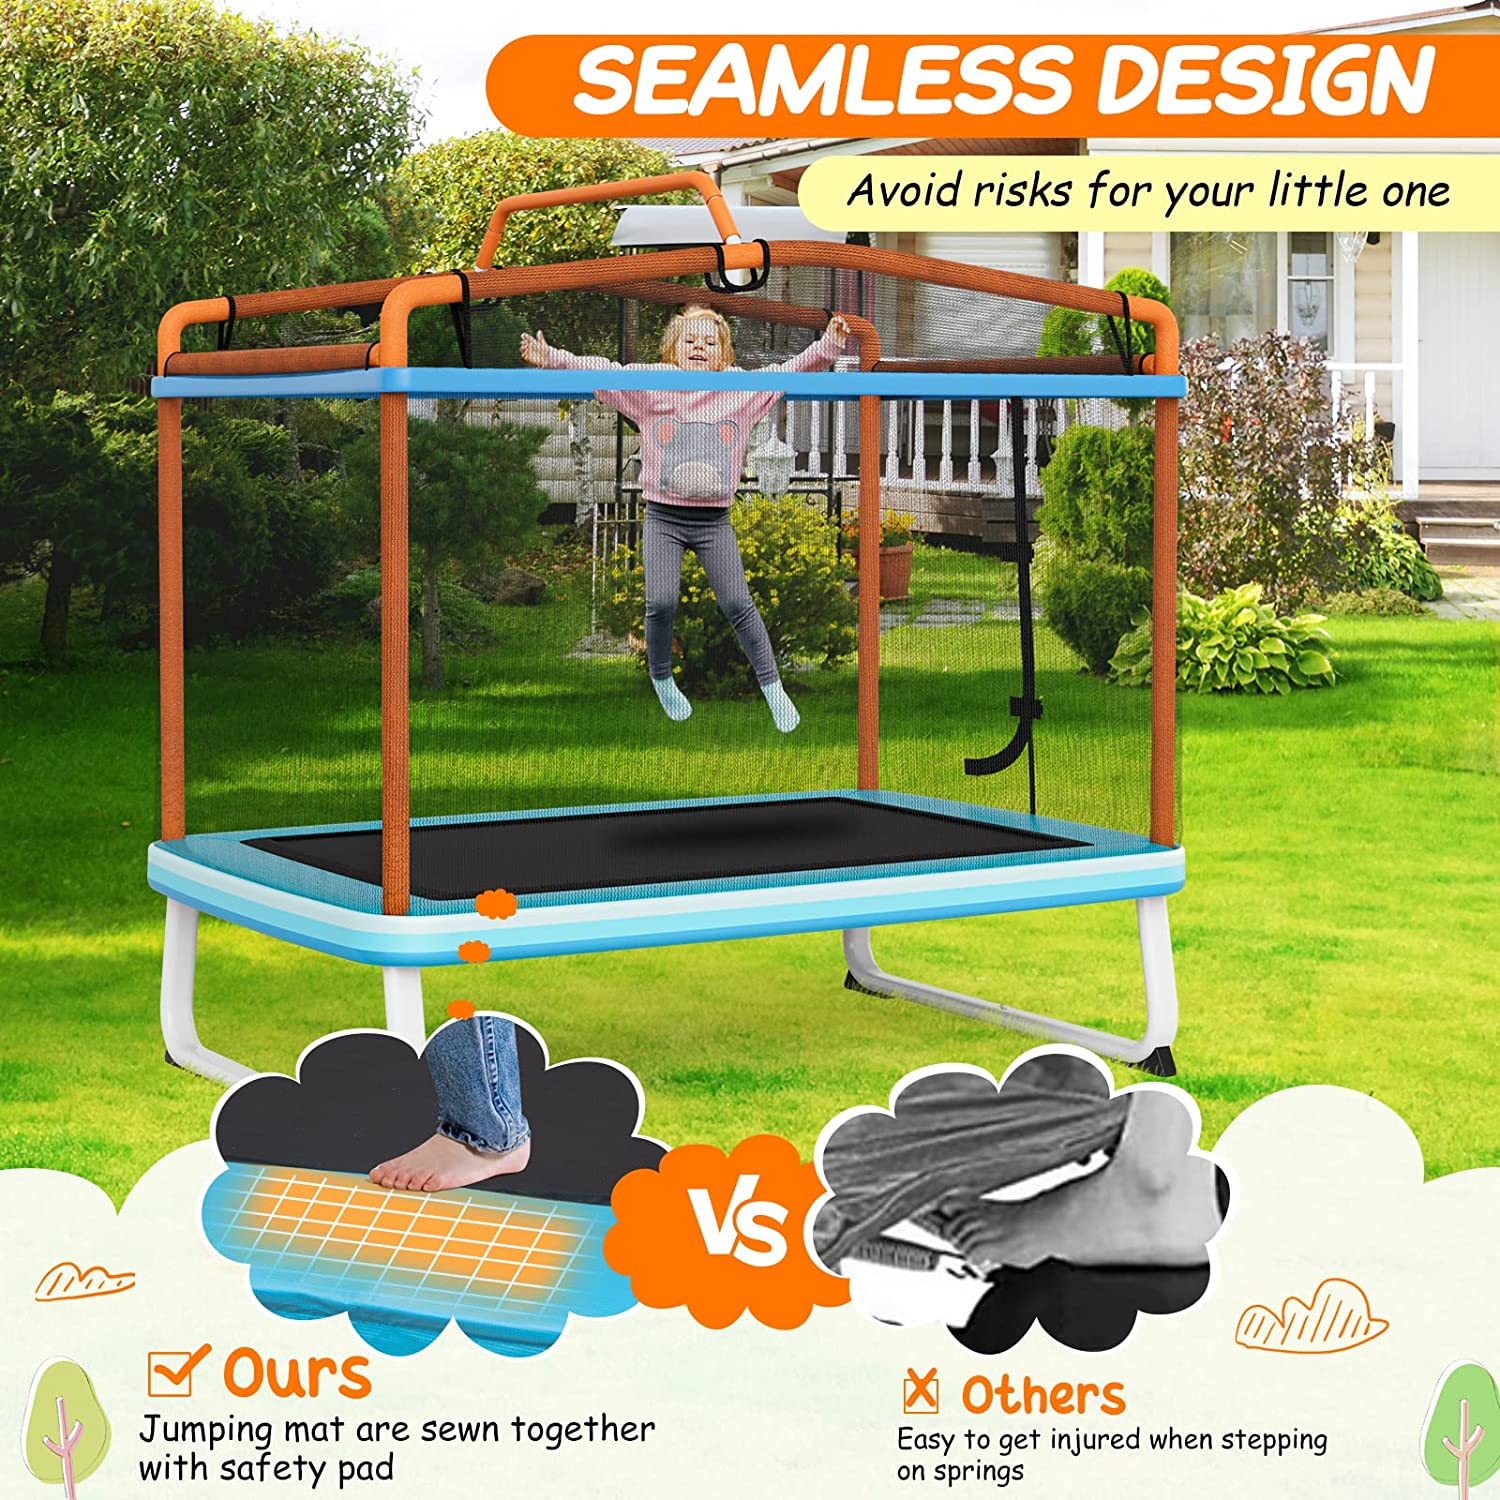 Chairliving 6FT Kids Trampoline 3-in-1 Mini Toddler Rectangle Trampoline with Enclosure Safety Net Seamless Spring Cover